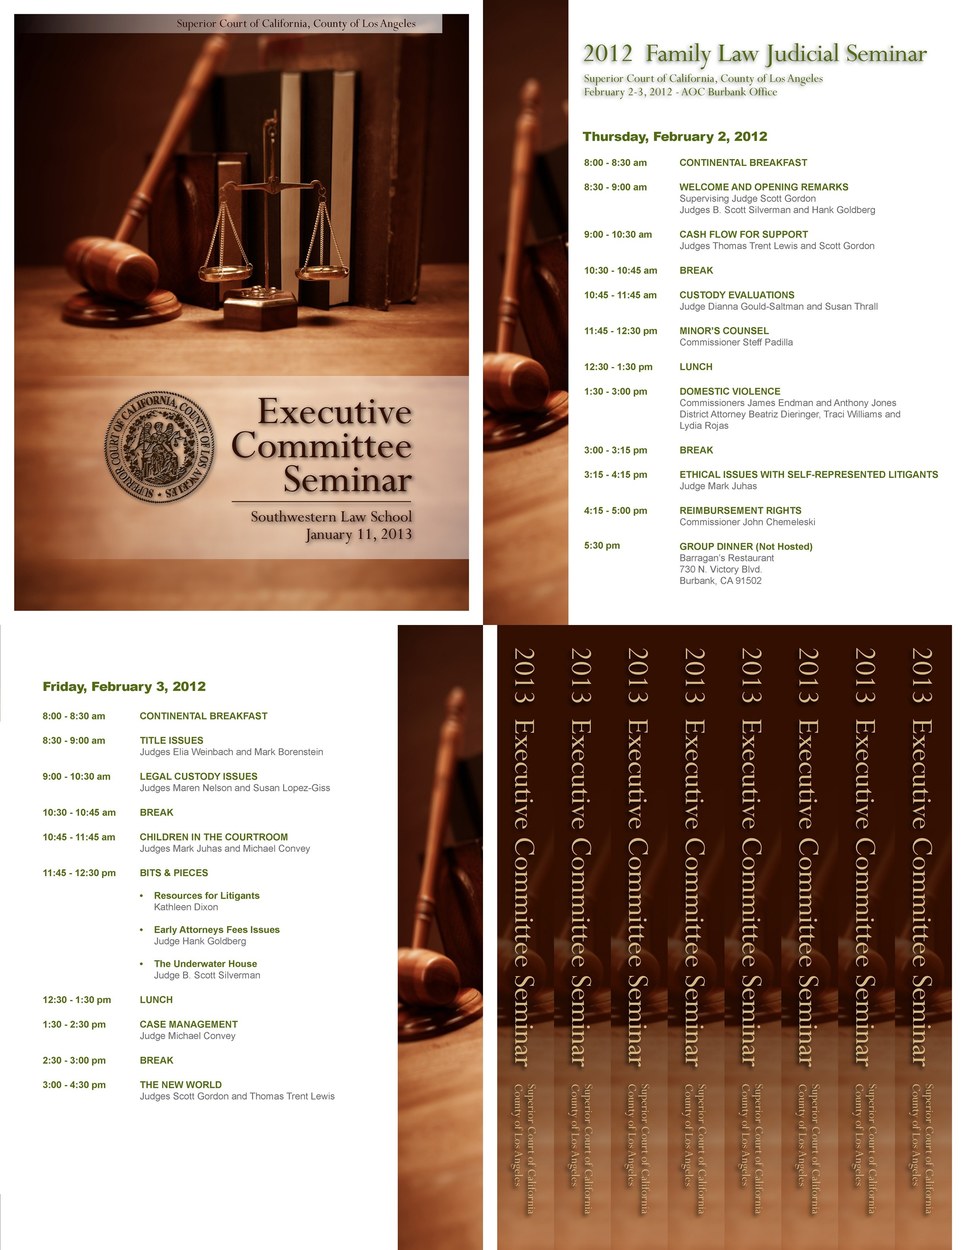 Los Angeles Superior Court - Executive Committee Seminar